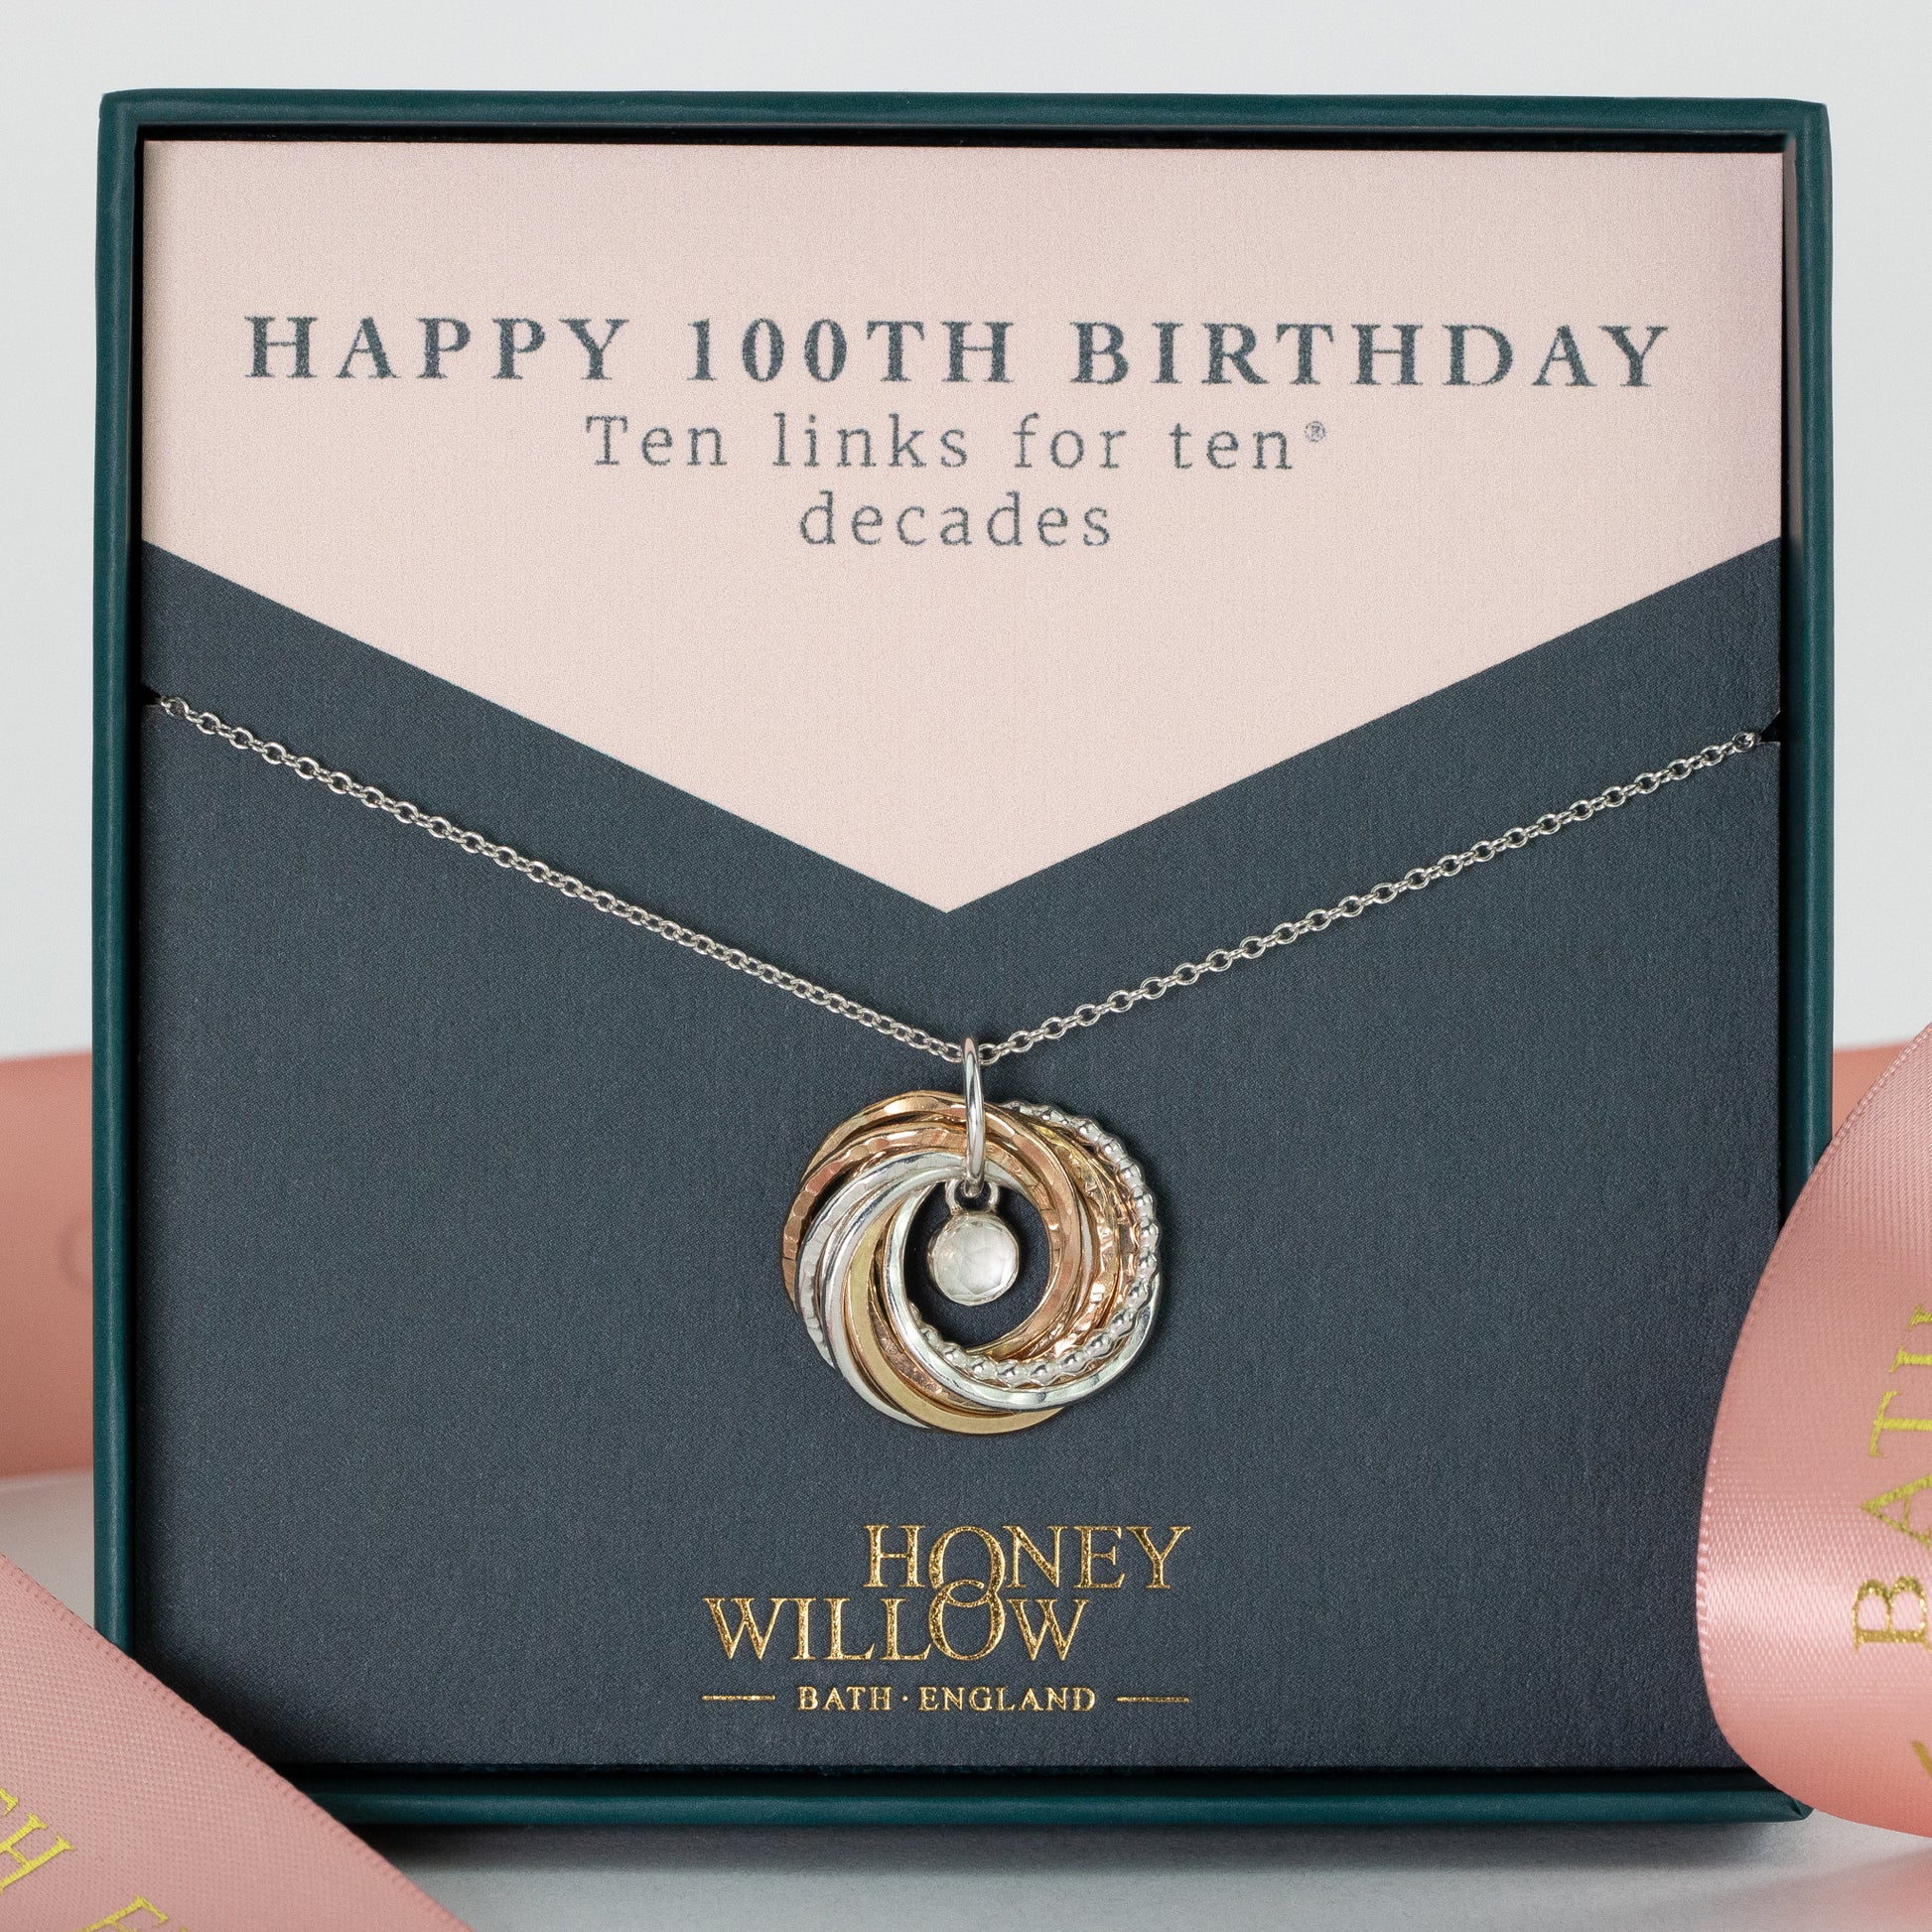 100th Birthday Birthstone Necklace - The Original 10 Links for 10 Decades Necklace - Petite Silver & Gold